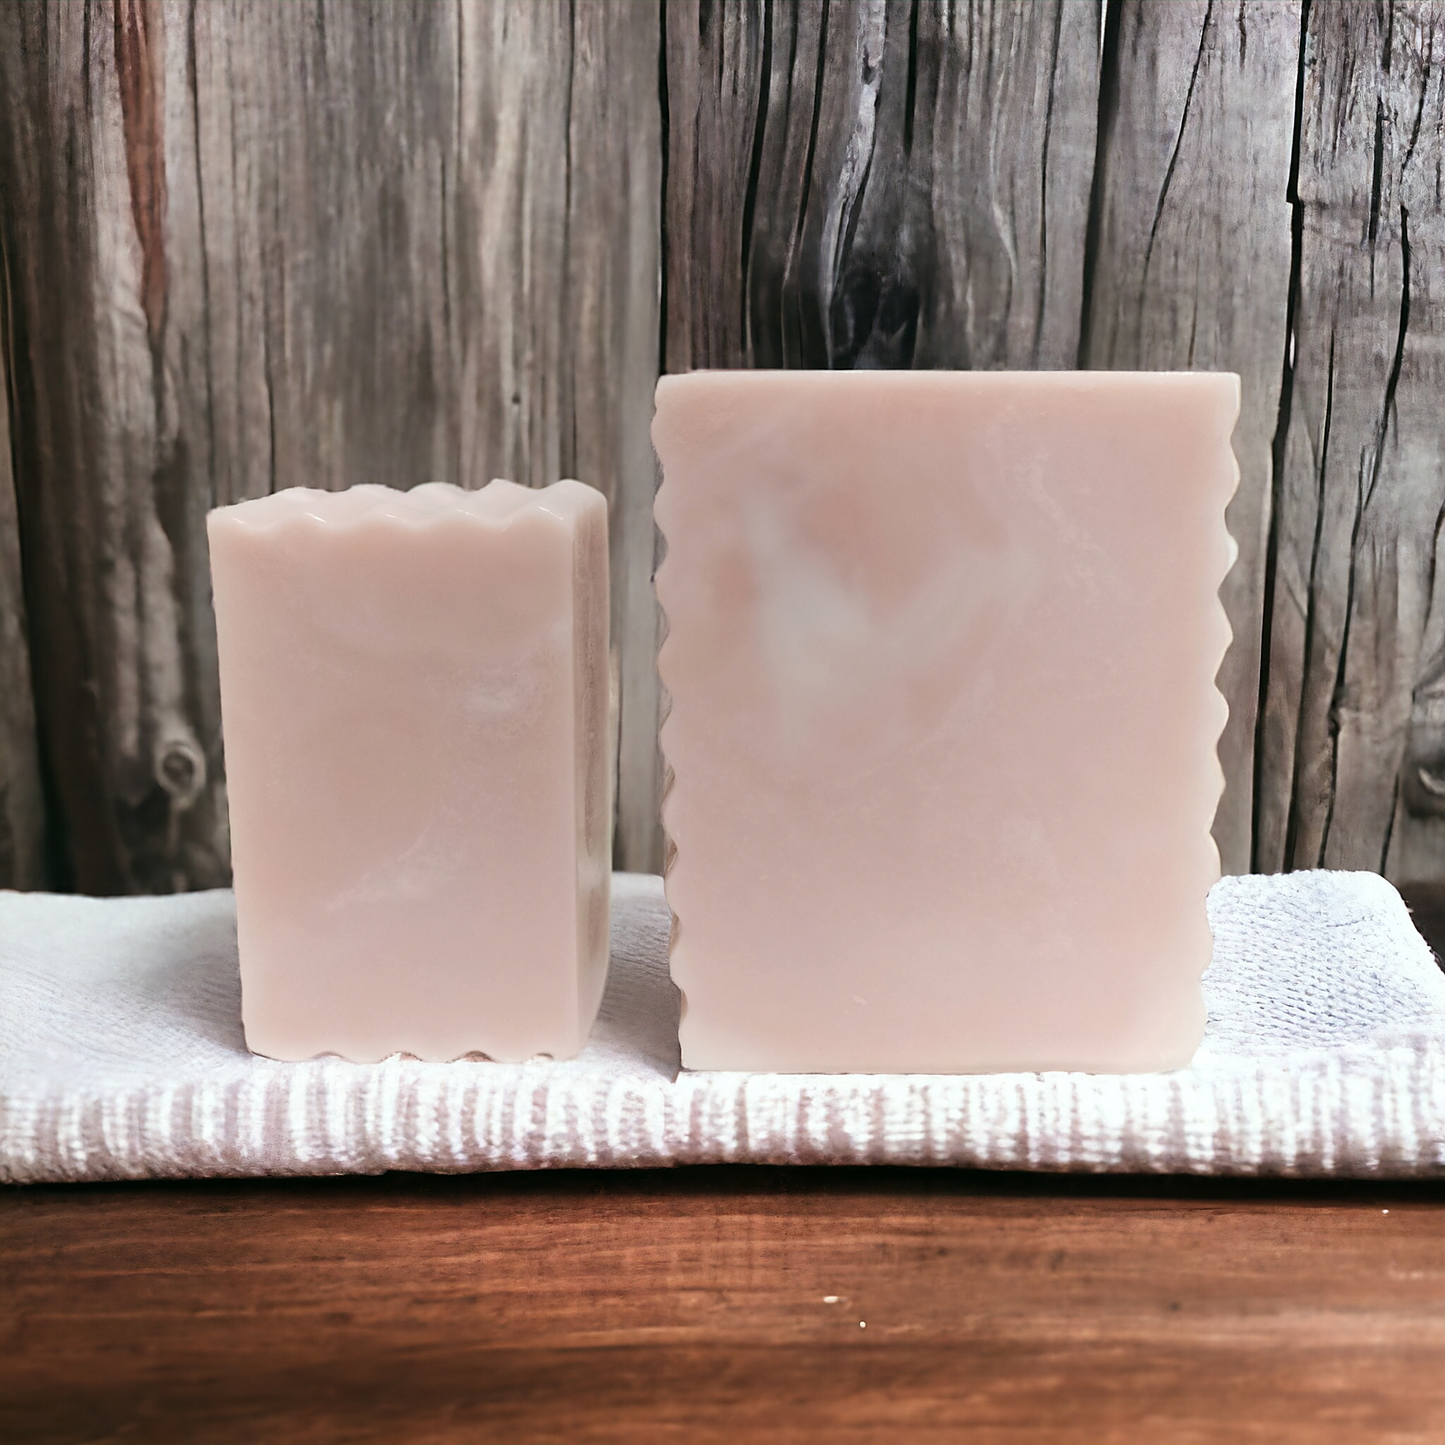 Spring Collection: Hanami | cherry blossom scent, pink kaolin clay